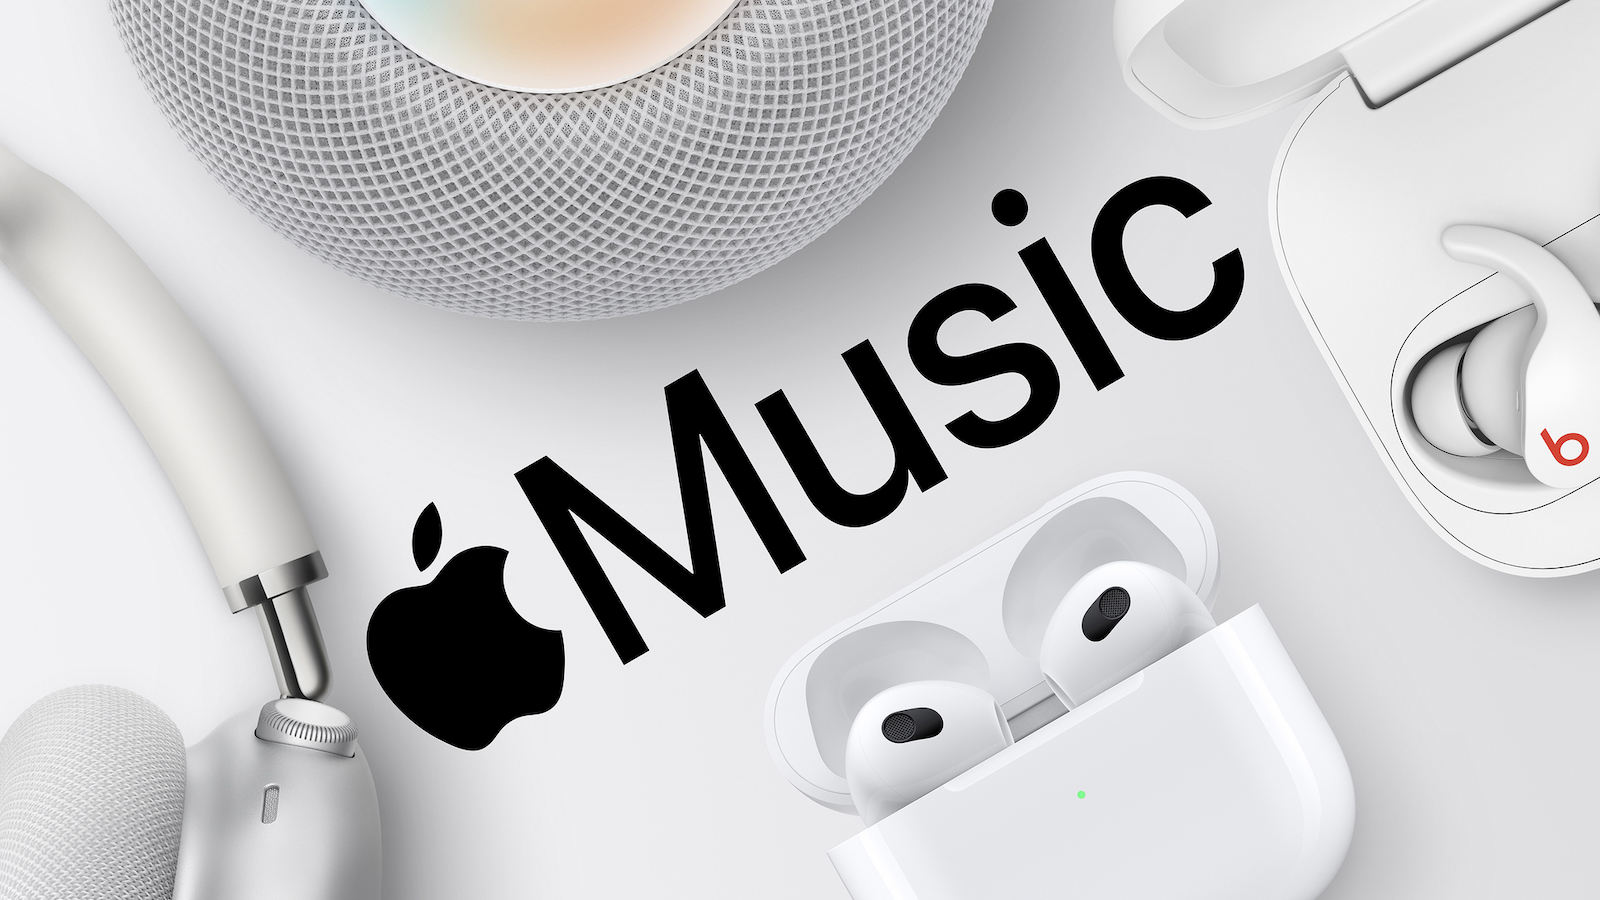 Apple Music Introduced as New Partner for Super Bowl Halftime Show